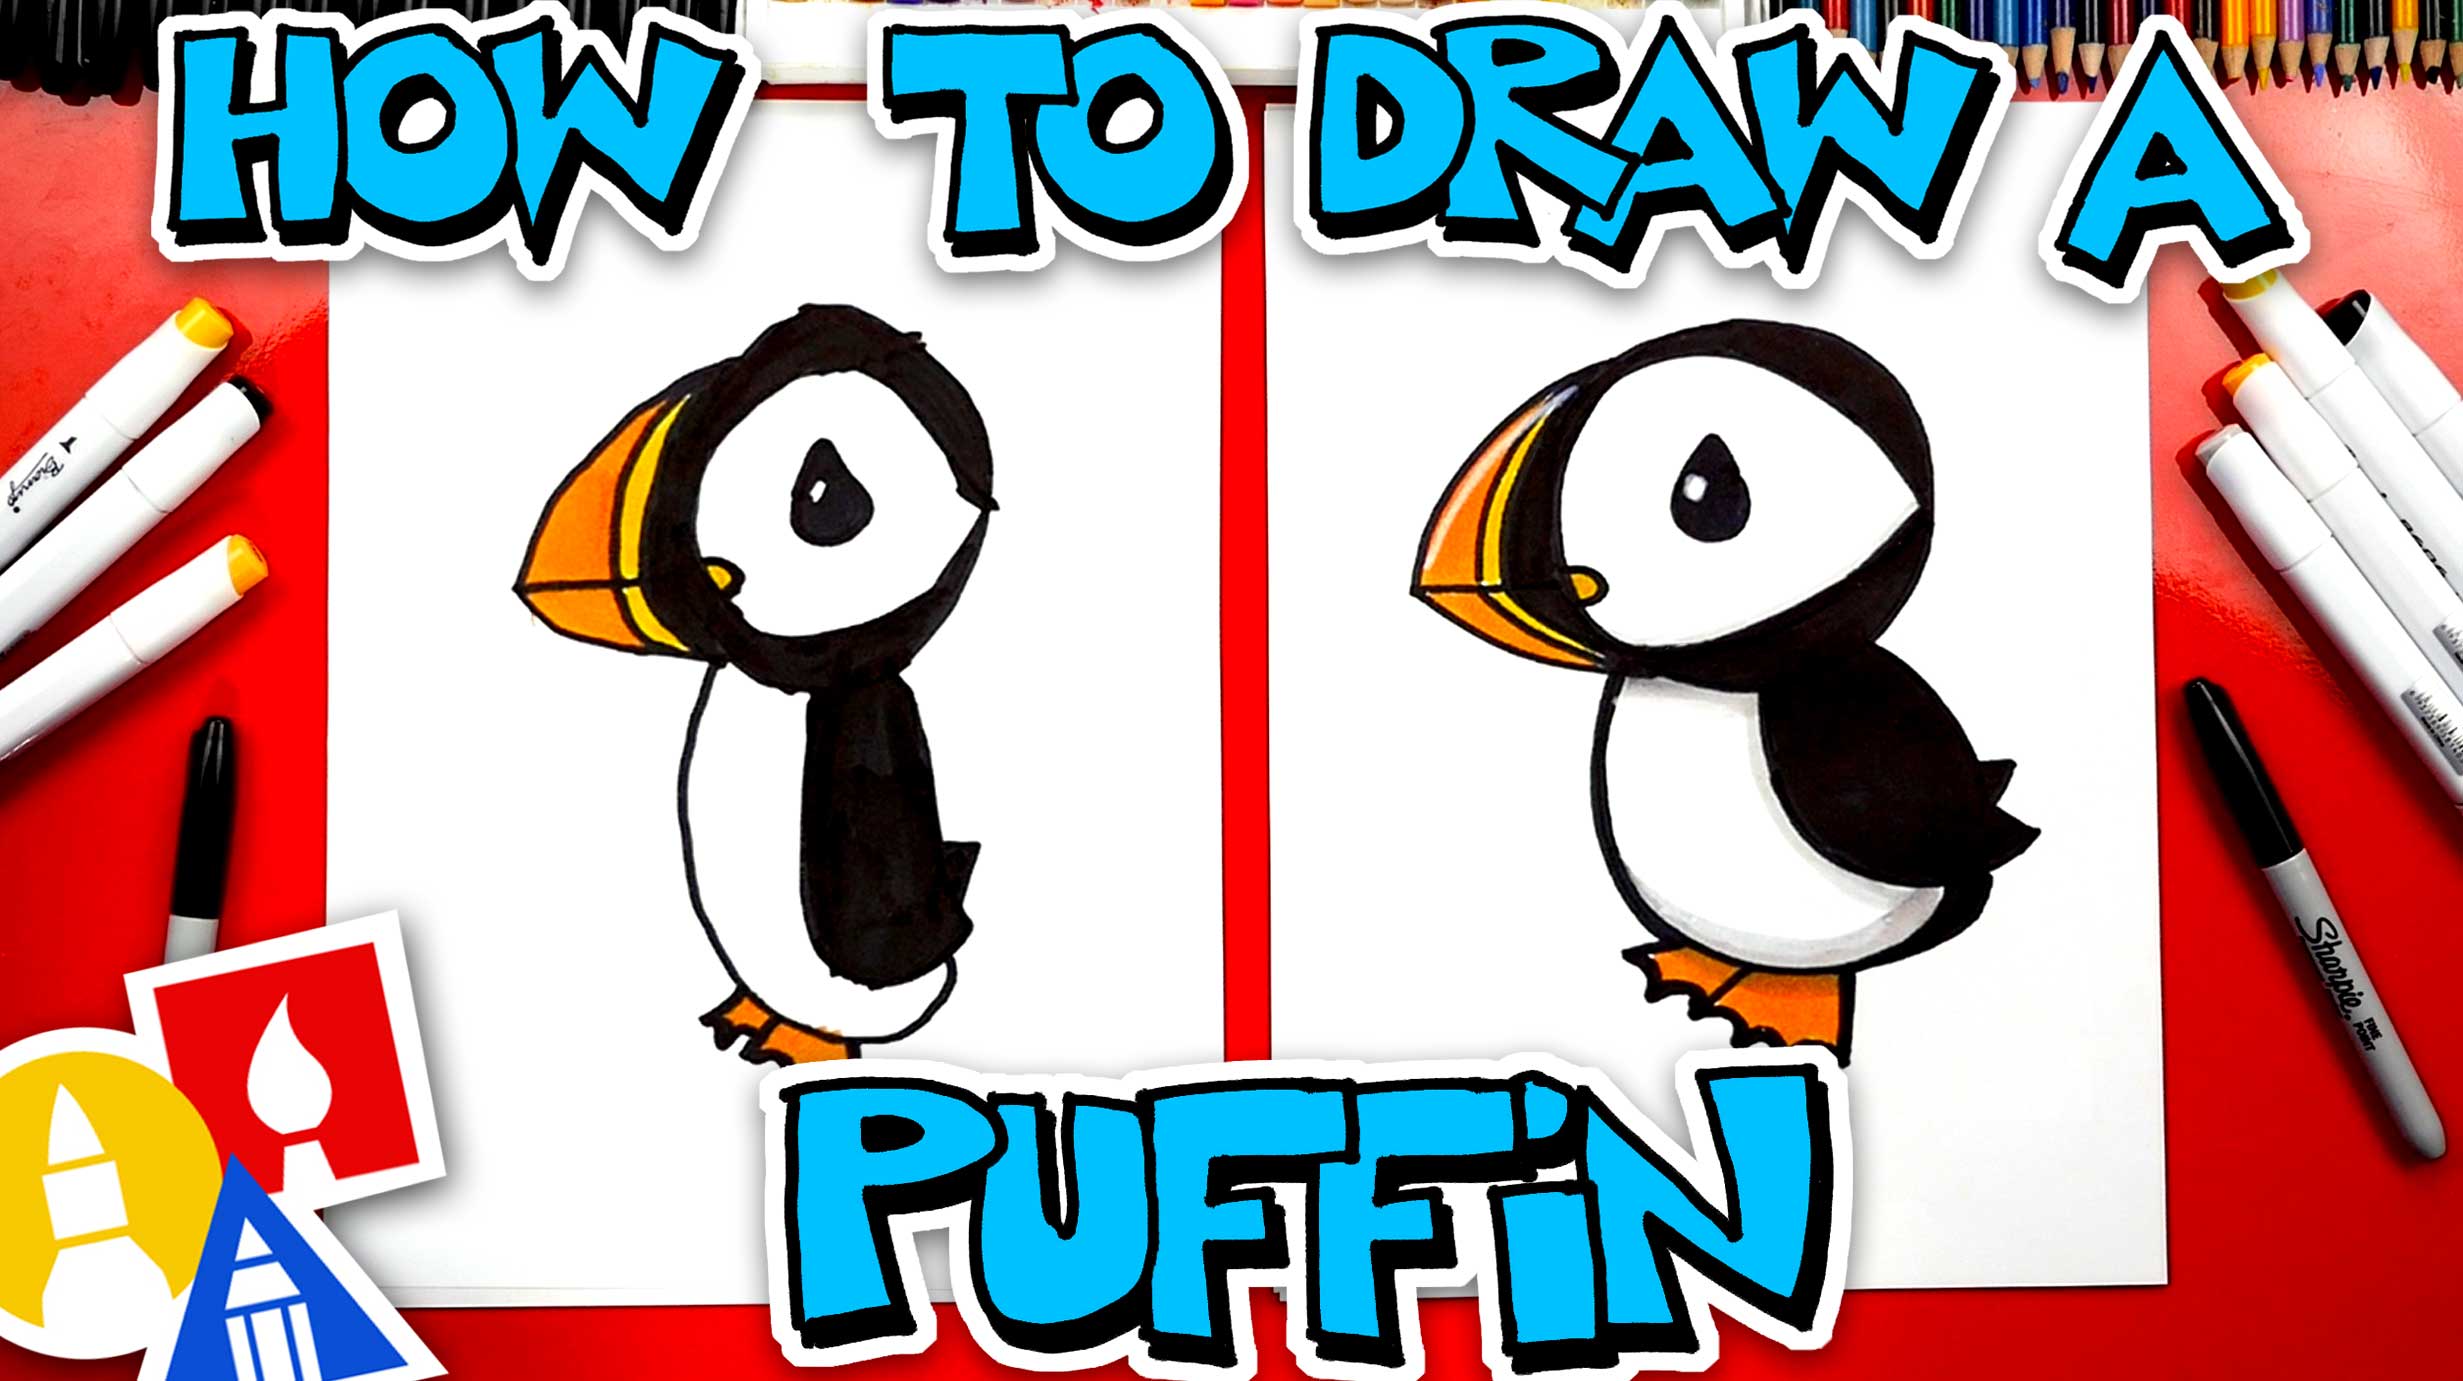 How To Draw A Puffin - Art For Kids Hub